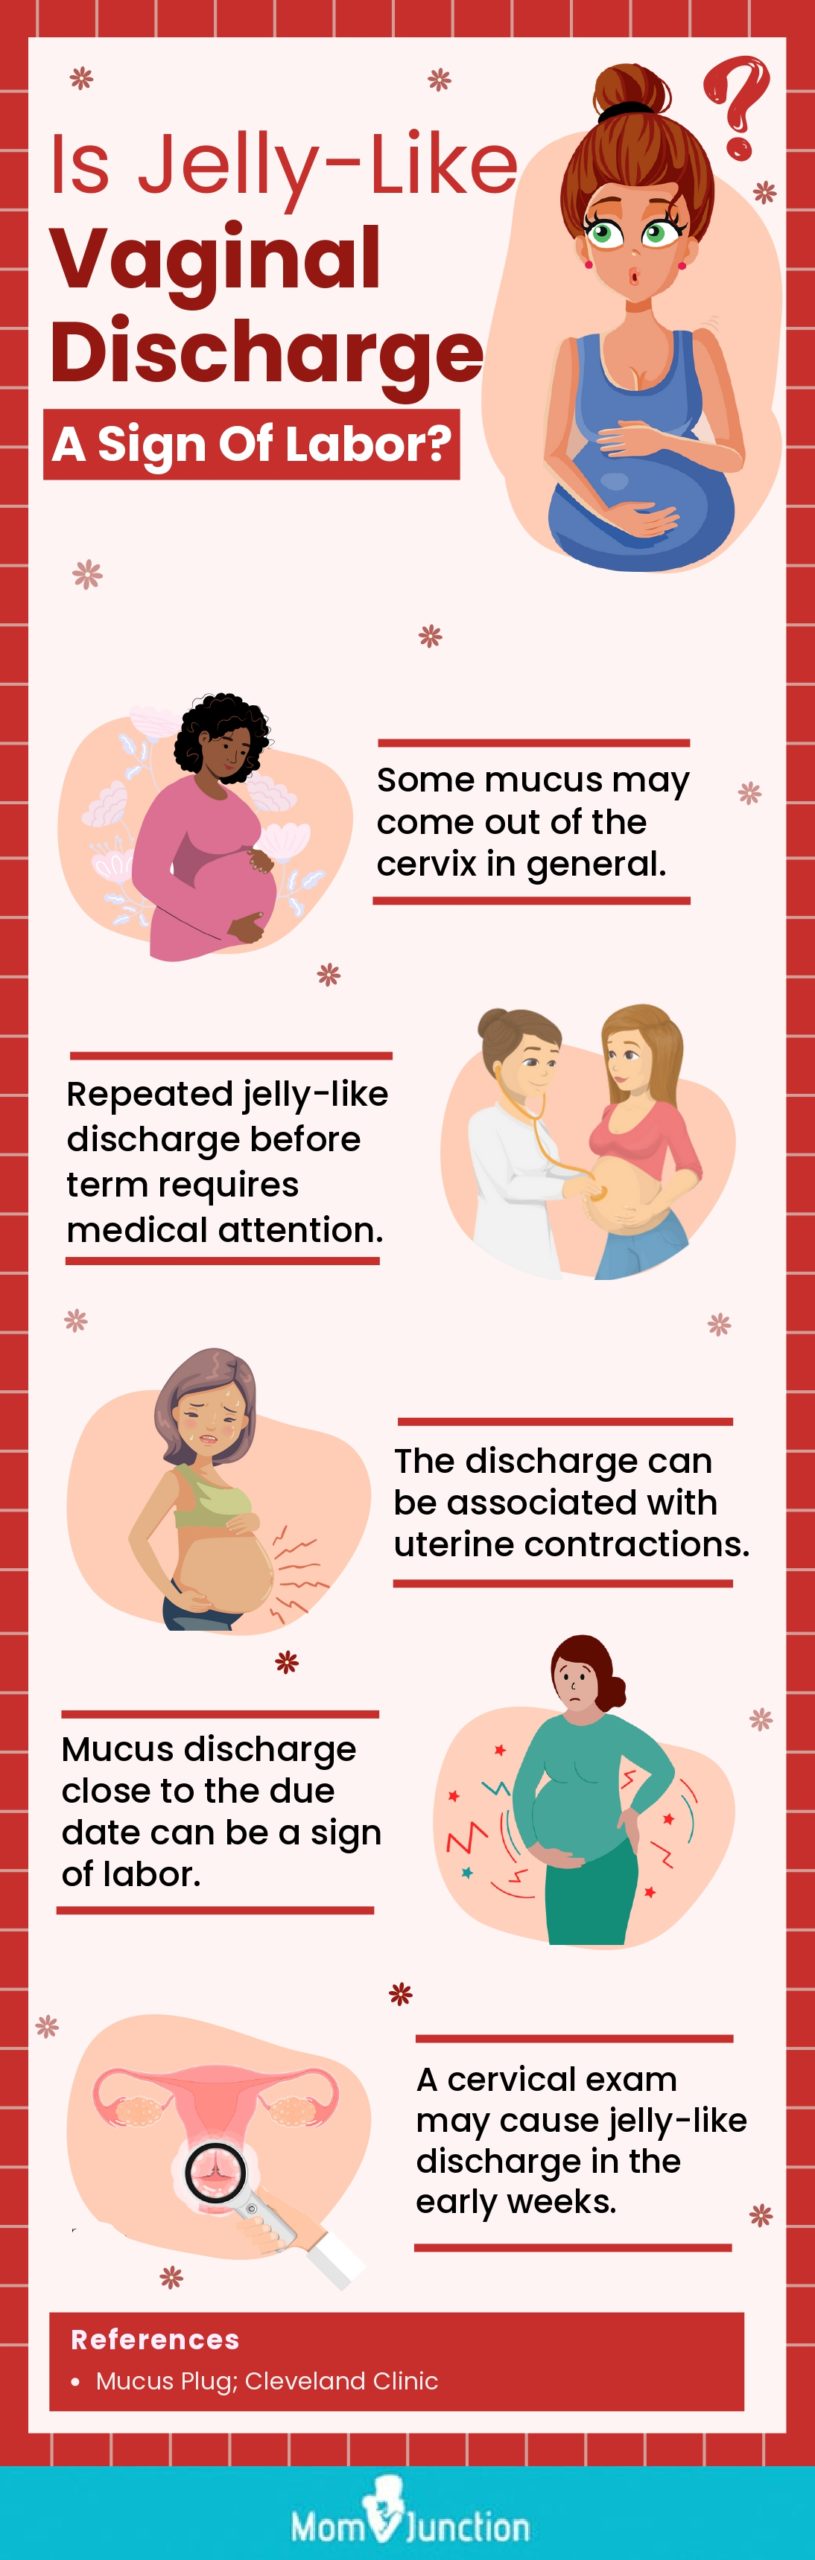 is jelly like vaginal discharge a sign of labor? (infographic)